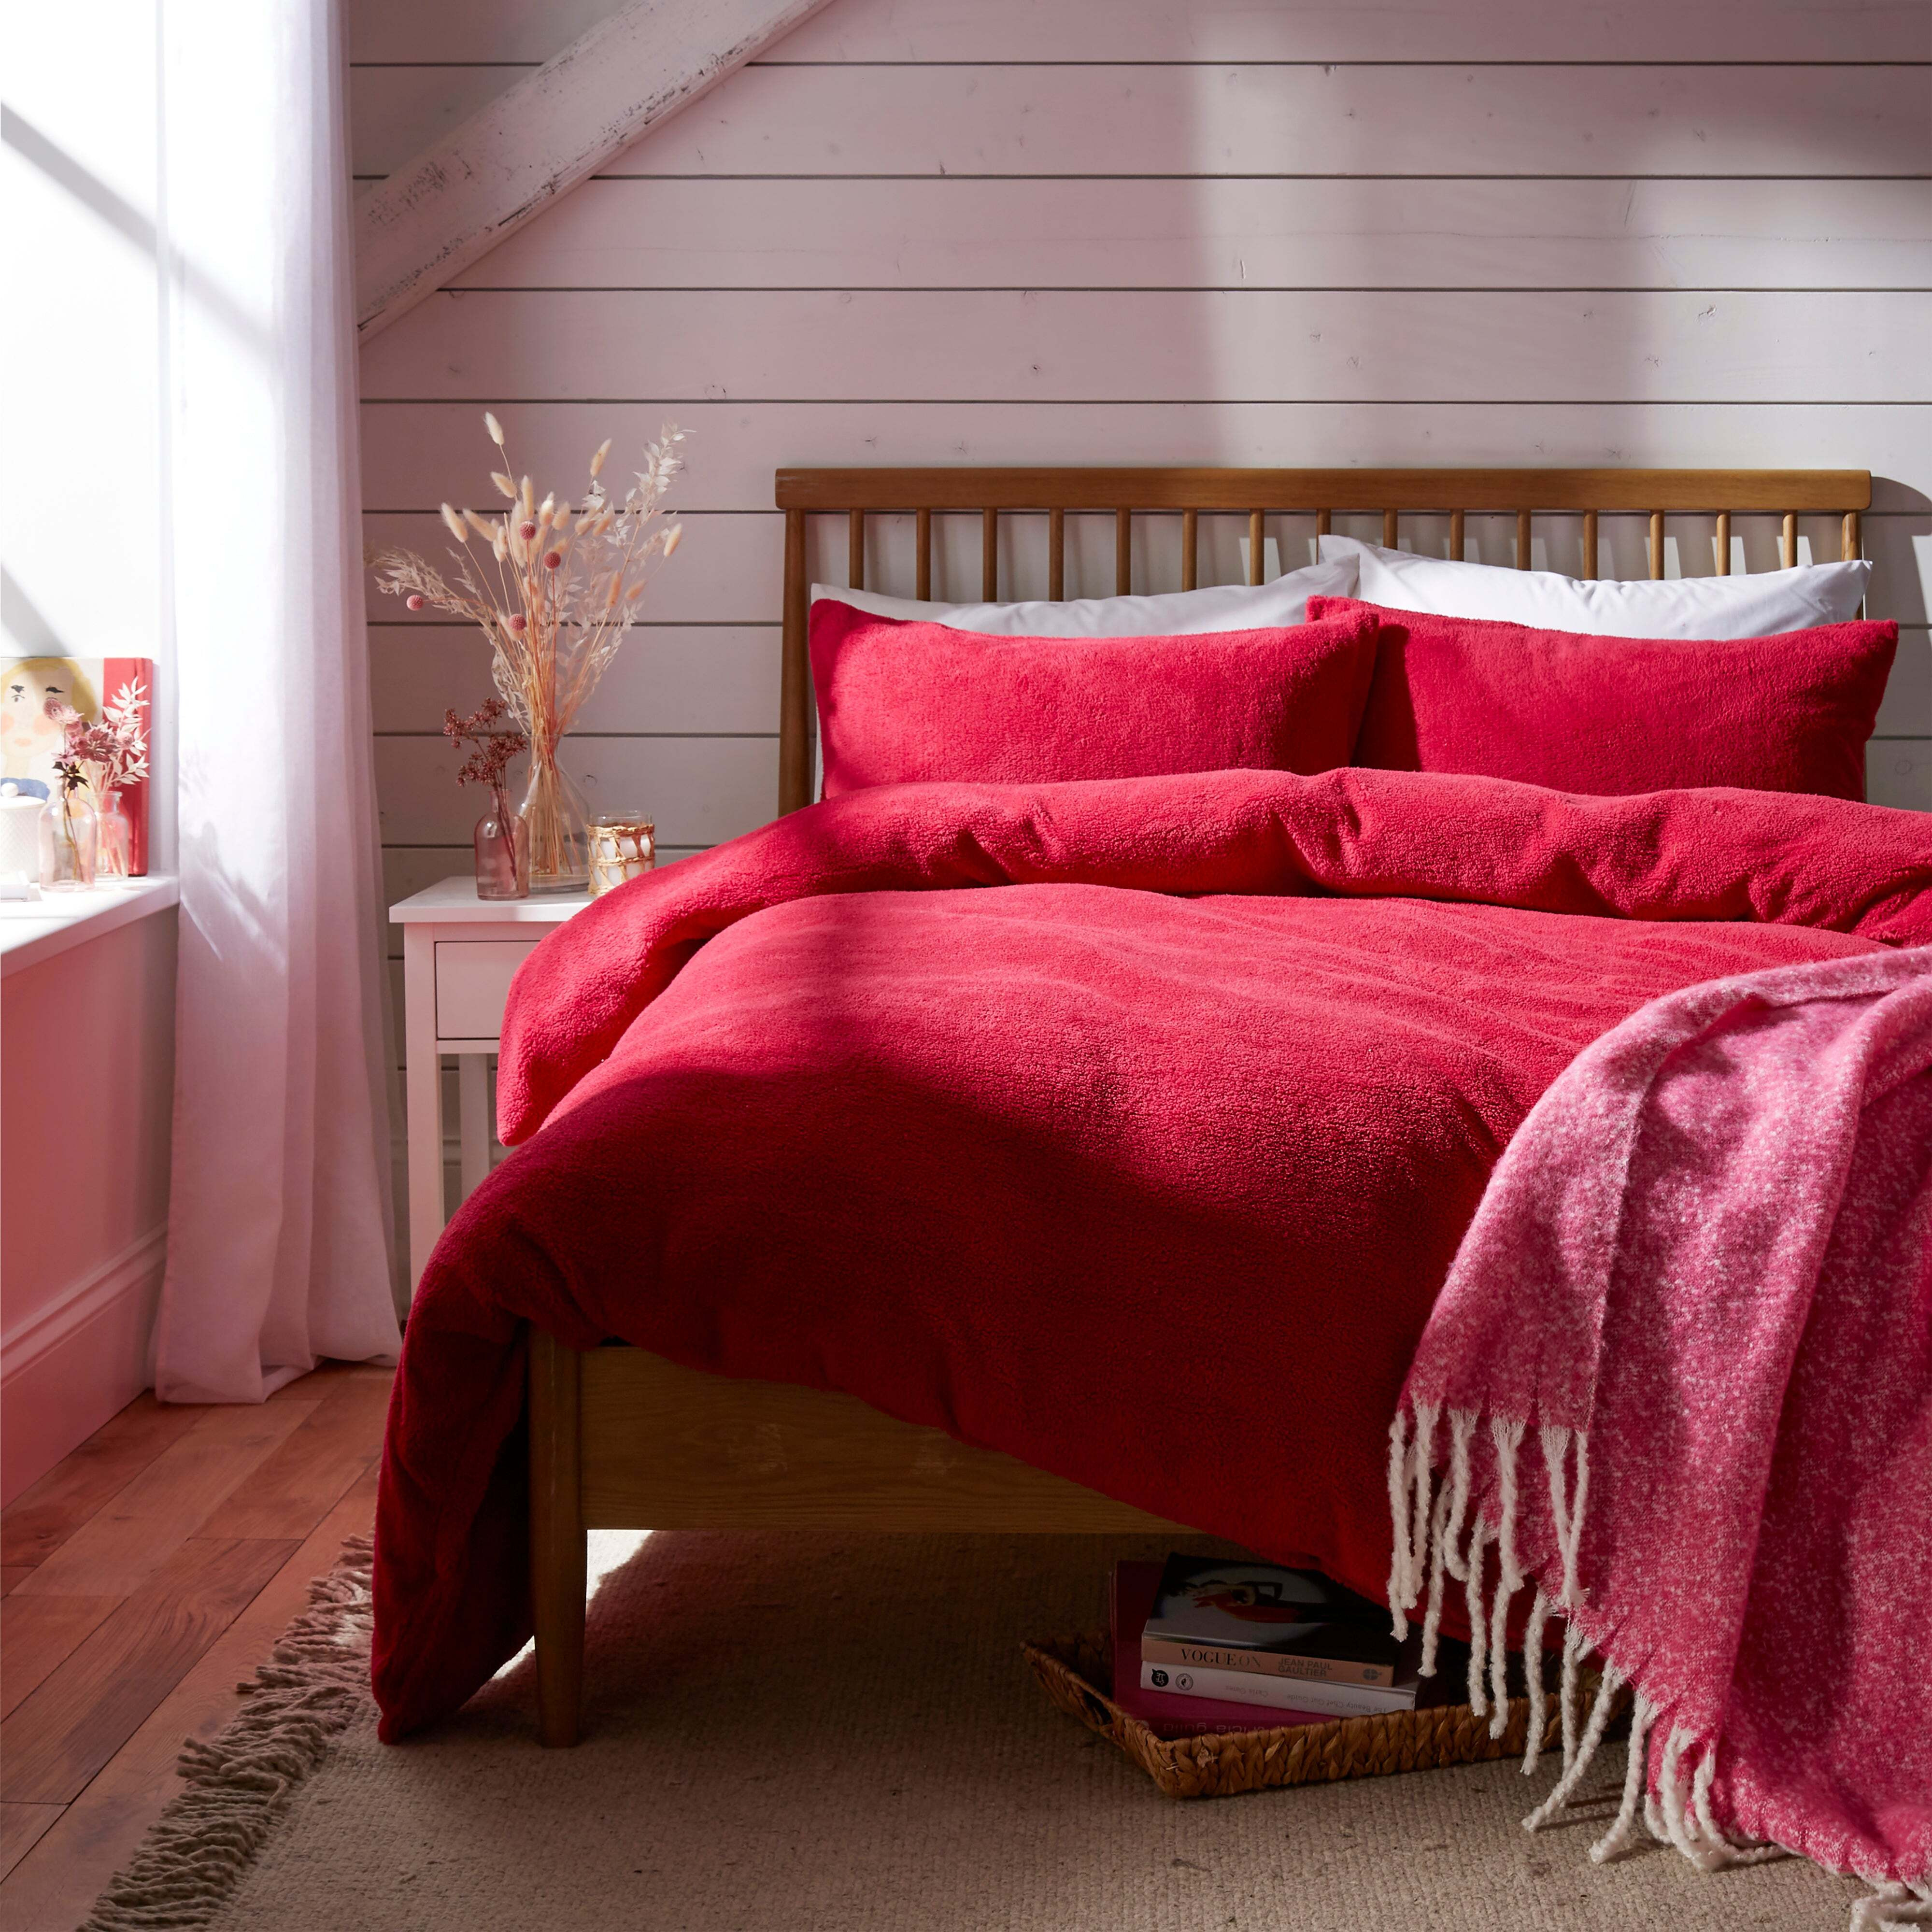 Dunelm Teddy Hot Pink Duvet Cover and Pillowcase Set, Size: Double Hot Pink